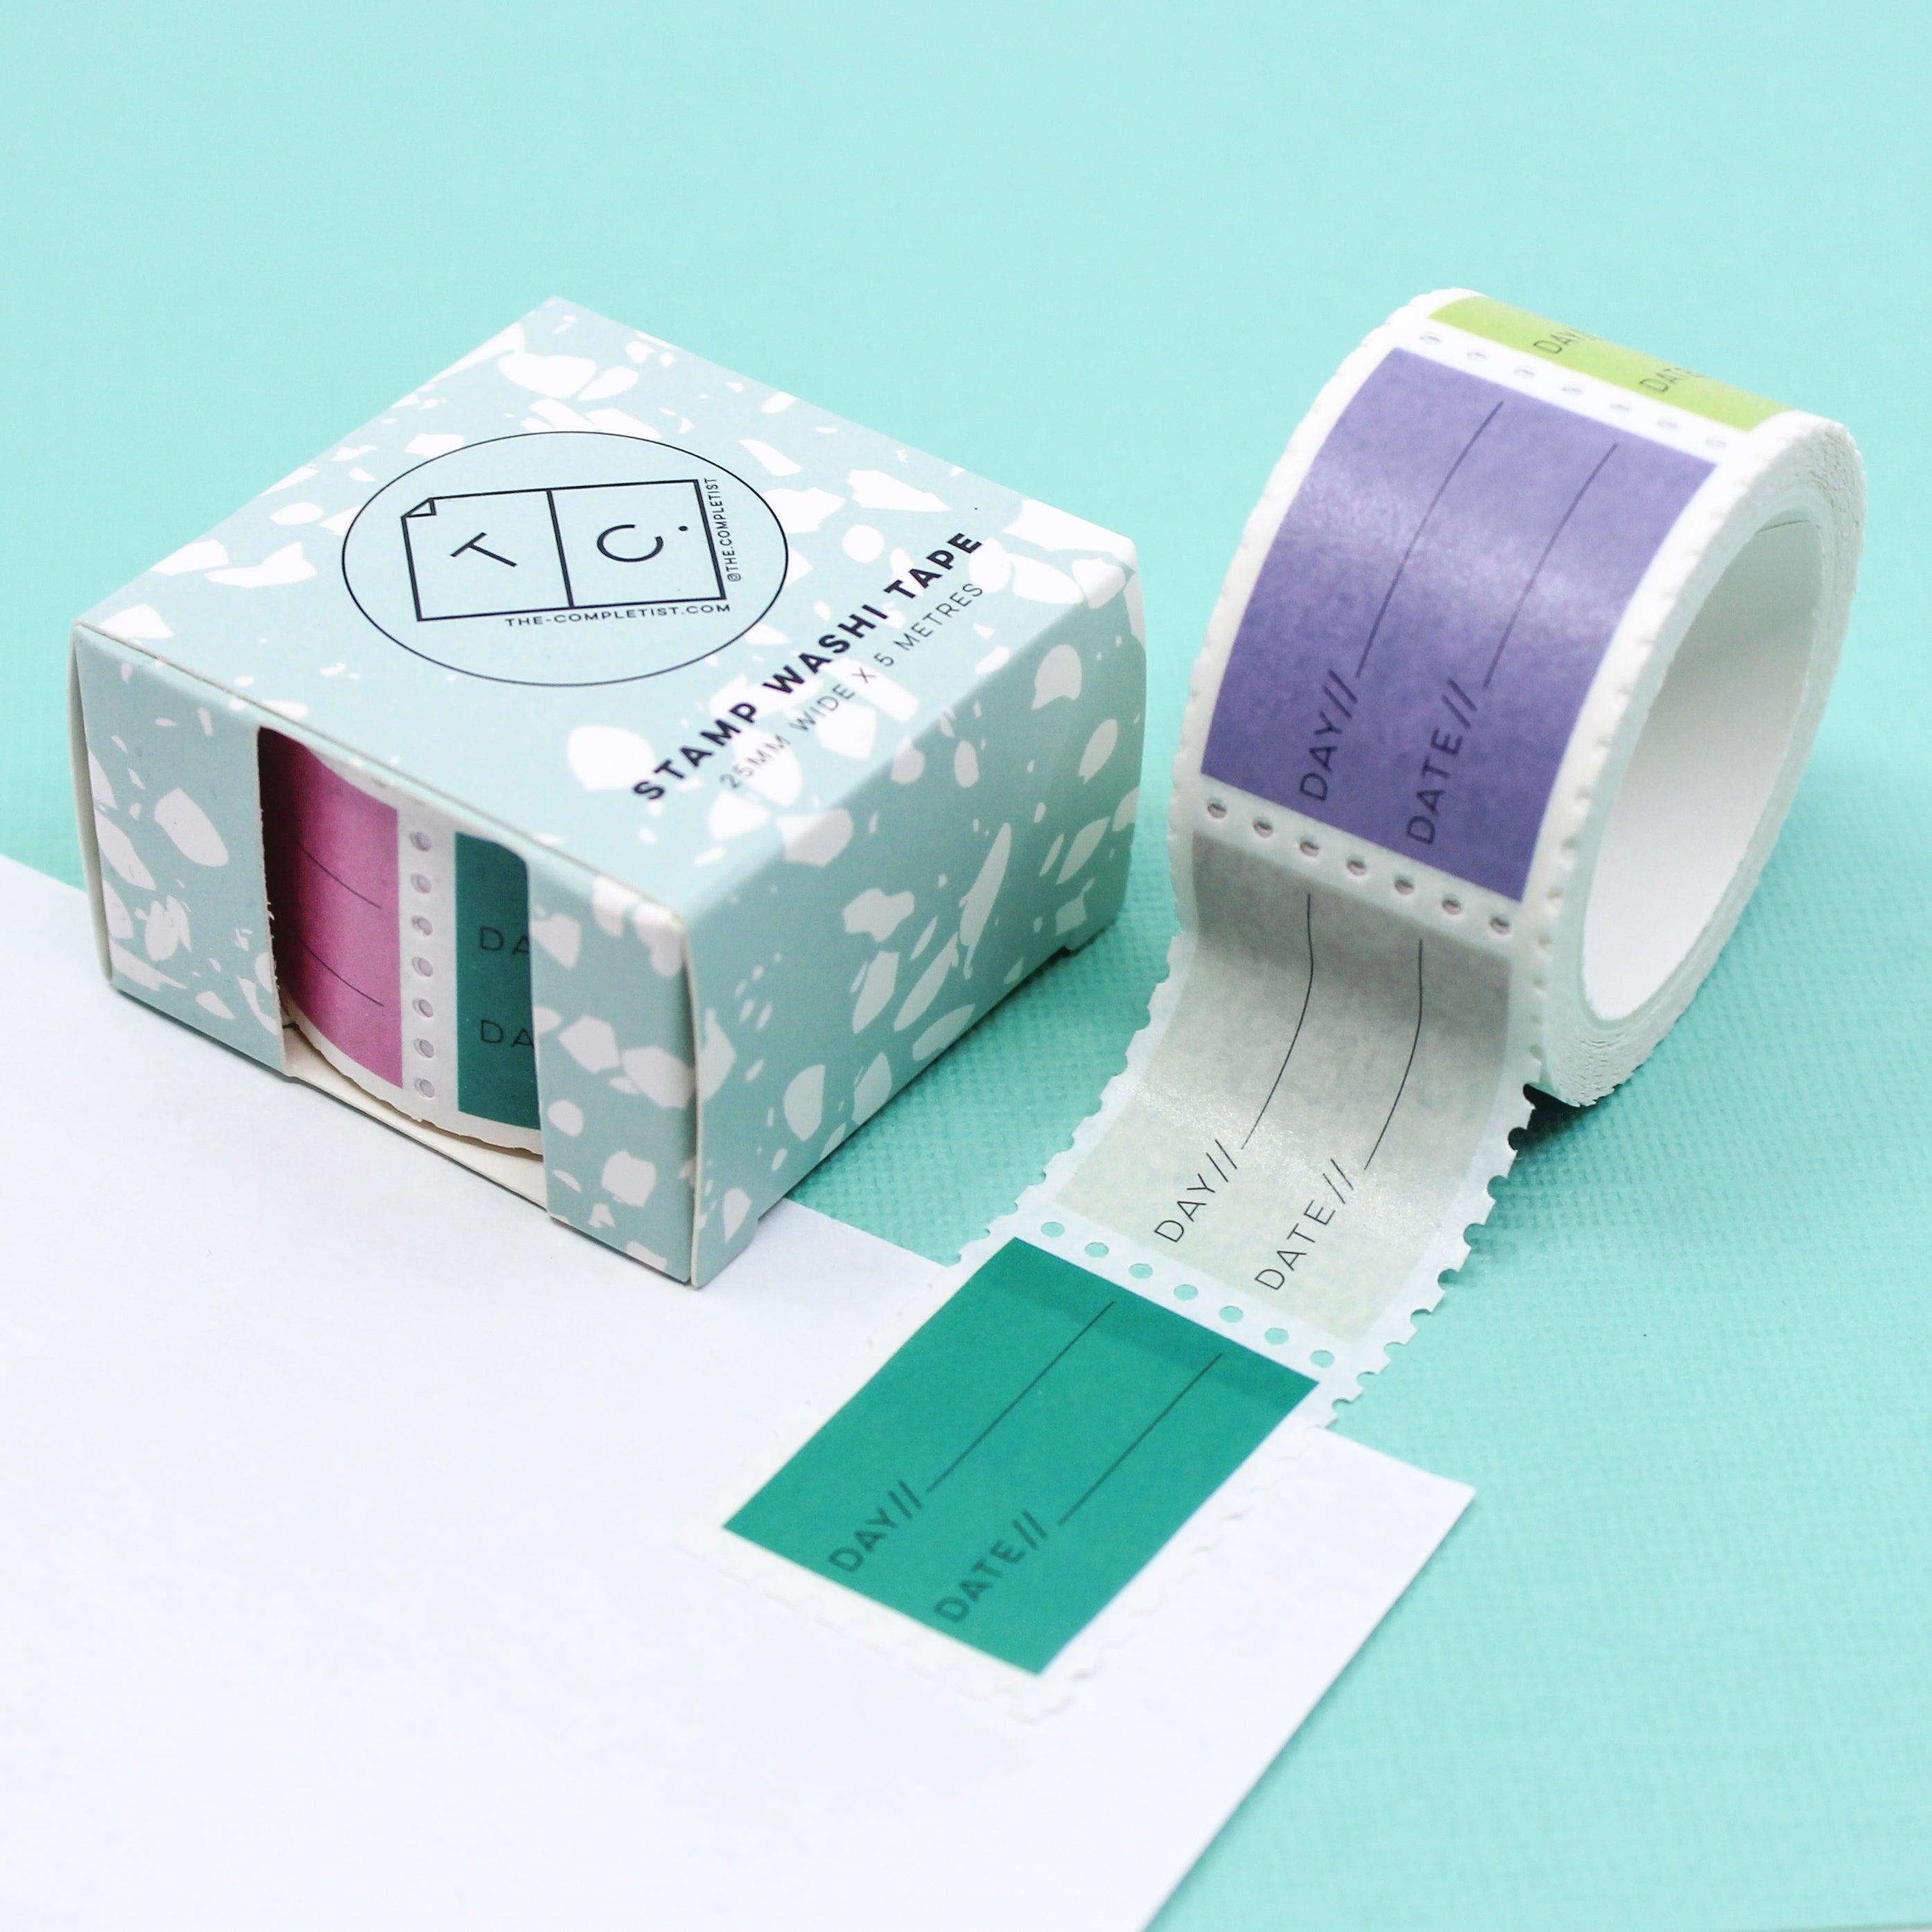 Enhance your planner with Day & Date Washi Tape Stamps, a versatile tool for organizing and marking important dates in your schedule. Perfect for adding a functional and decorative touch to your planning spreads. This tape is from the Completist and sold at BBB Supplies Craft Shop.